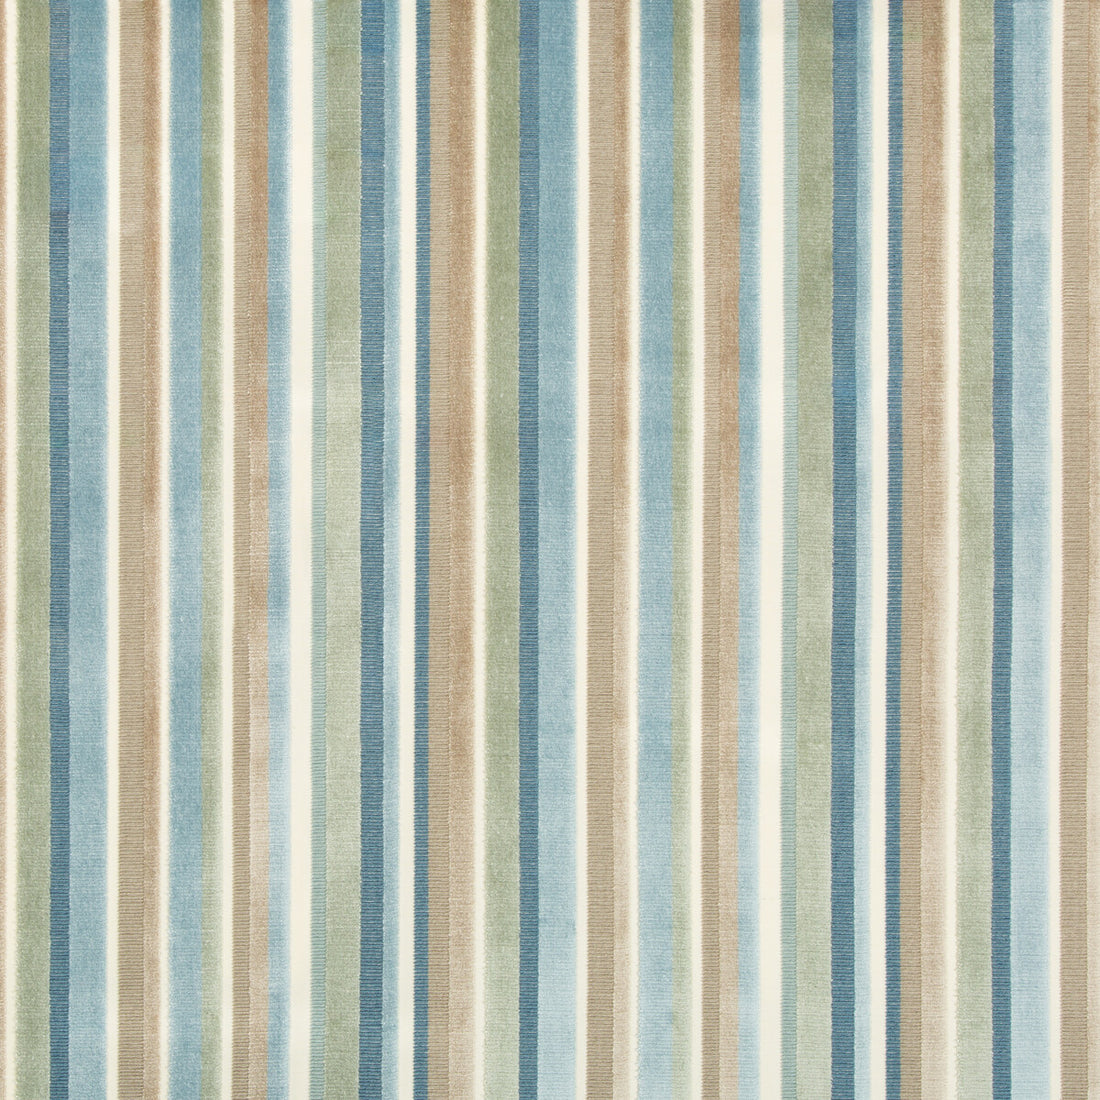 Bodenham fabric in ocean color - pattern 35302.15.0 - by Kravet Basics in the Greenwich collection